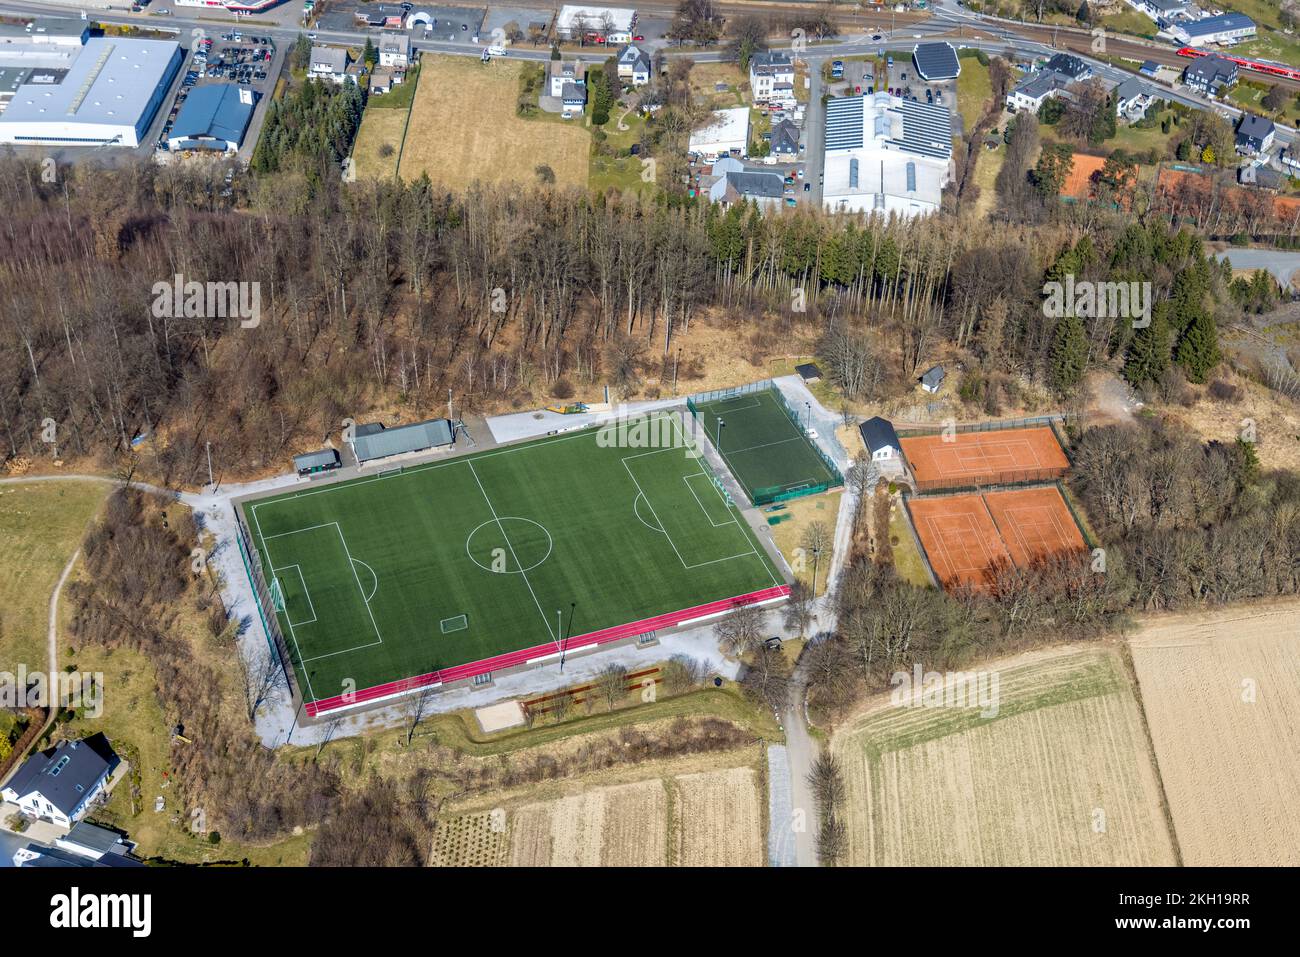 Aerial view, Ostwig sports field and tennis courts in Bestwig, Sauerland, North Rhine-Westphalia, Germany Stock Photo